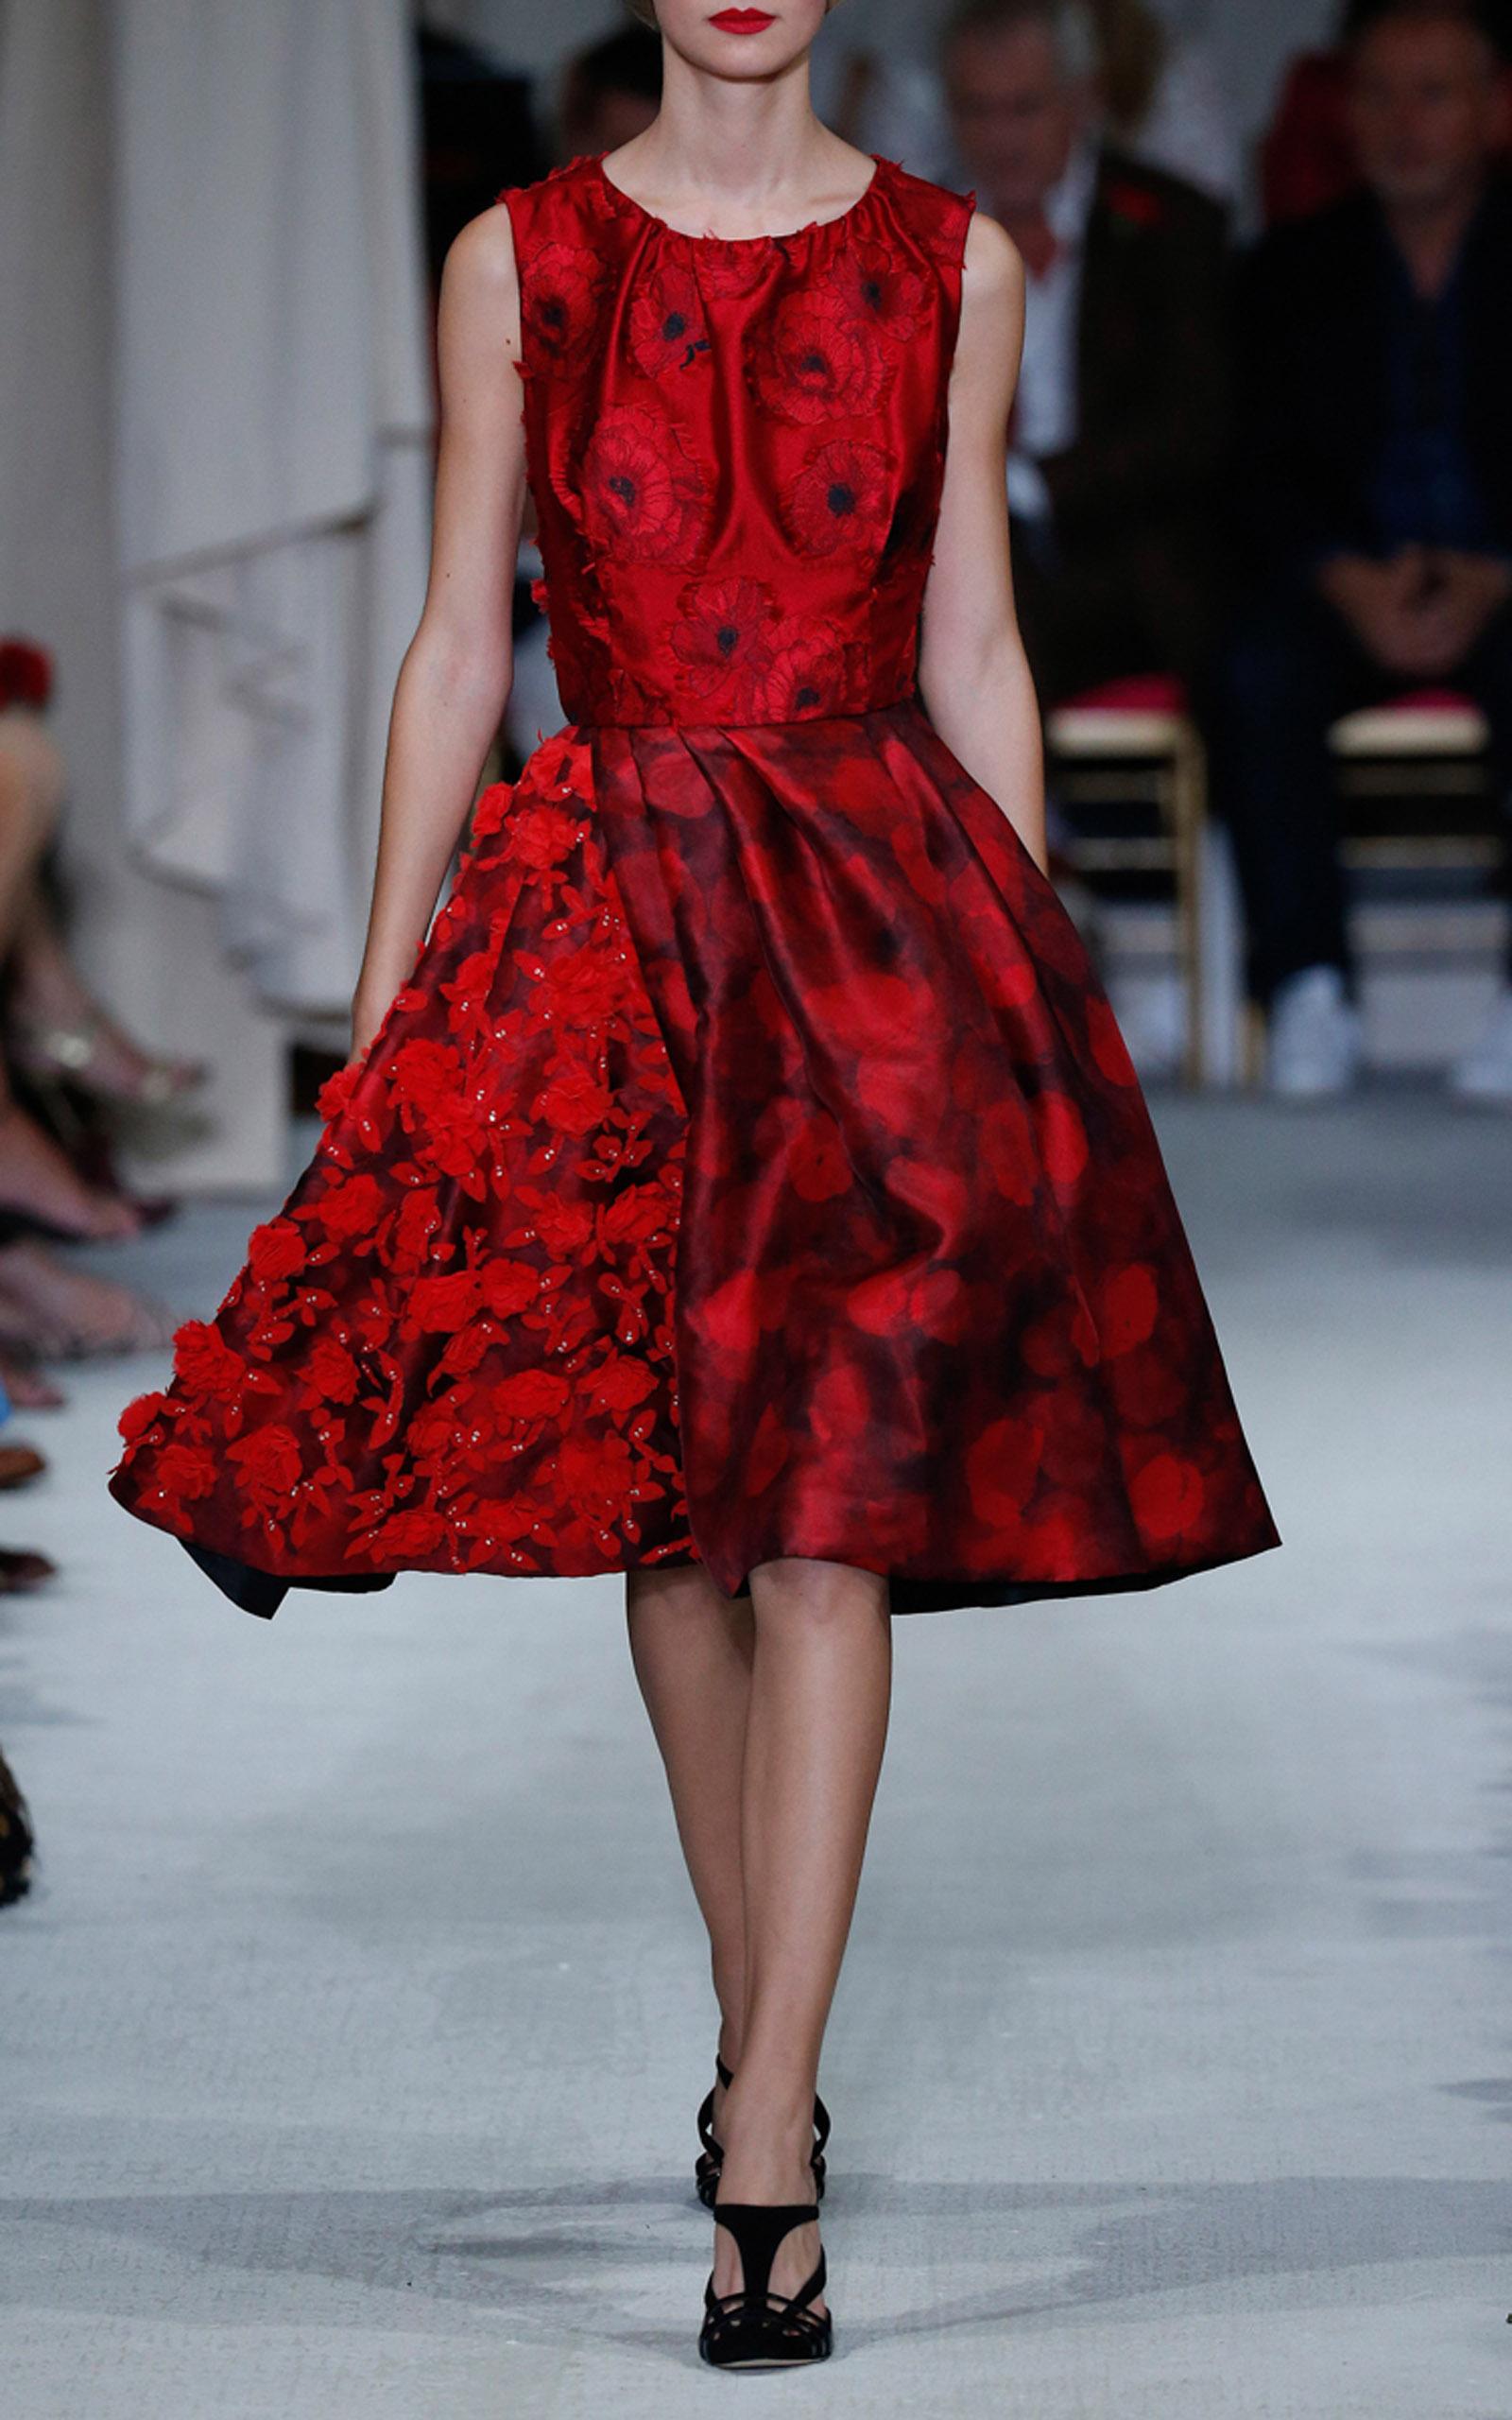 New Oscar De La Renta Ruby Red 3-D Floral Cocktail Dress
S/S 2016 Collection
Designer size - 8
This sleeveless Oscar de la Renta dress is rendered in feel coupe jacquard with a poppy motif and features a jewel neckline with pleated flared skirt and